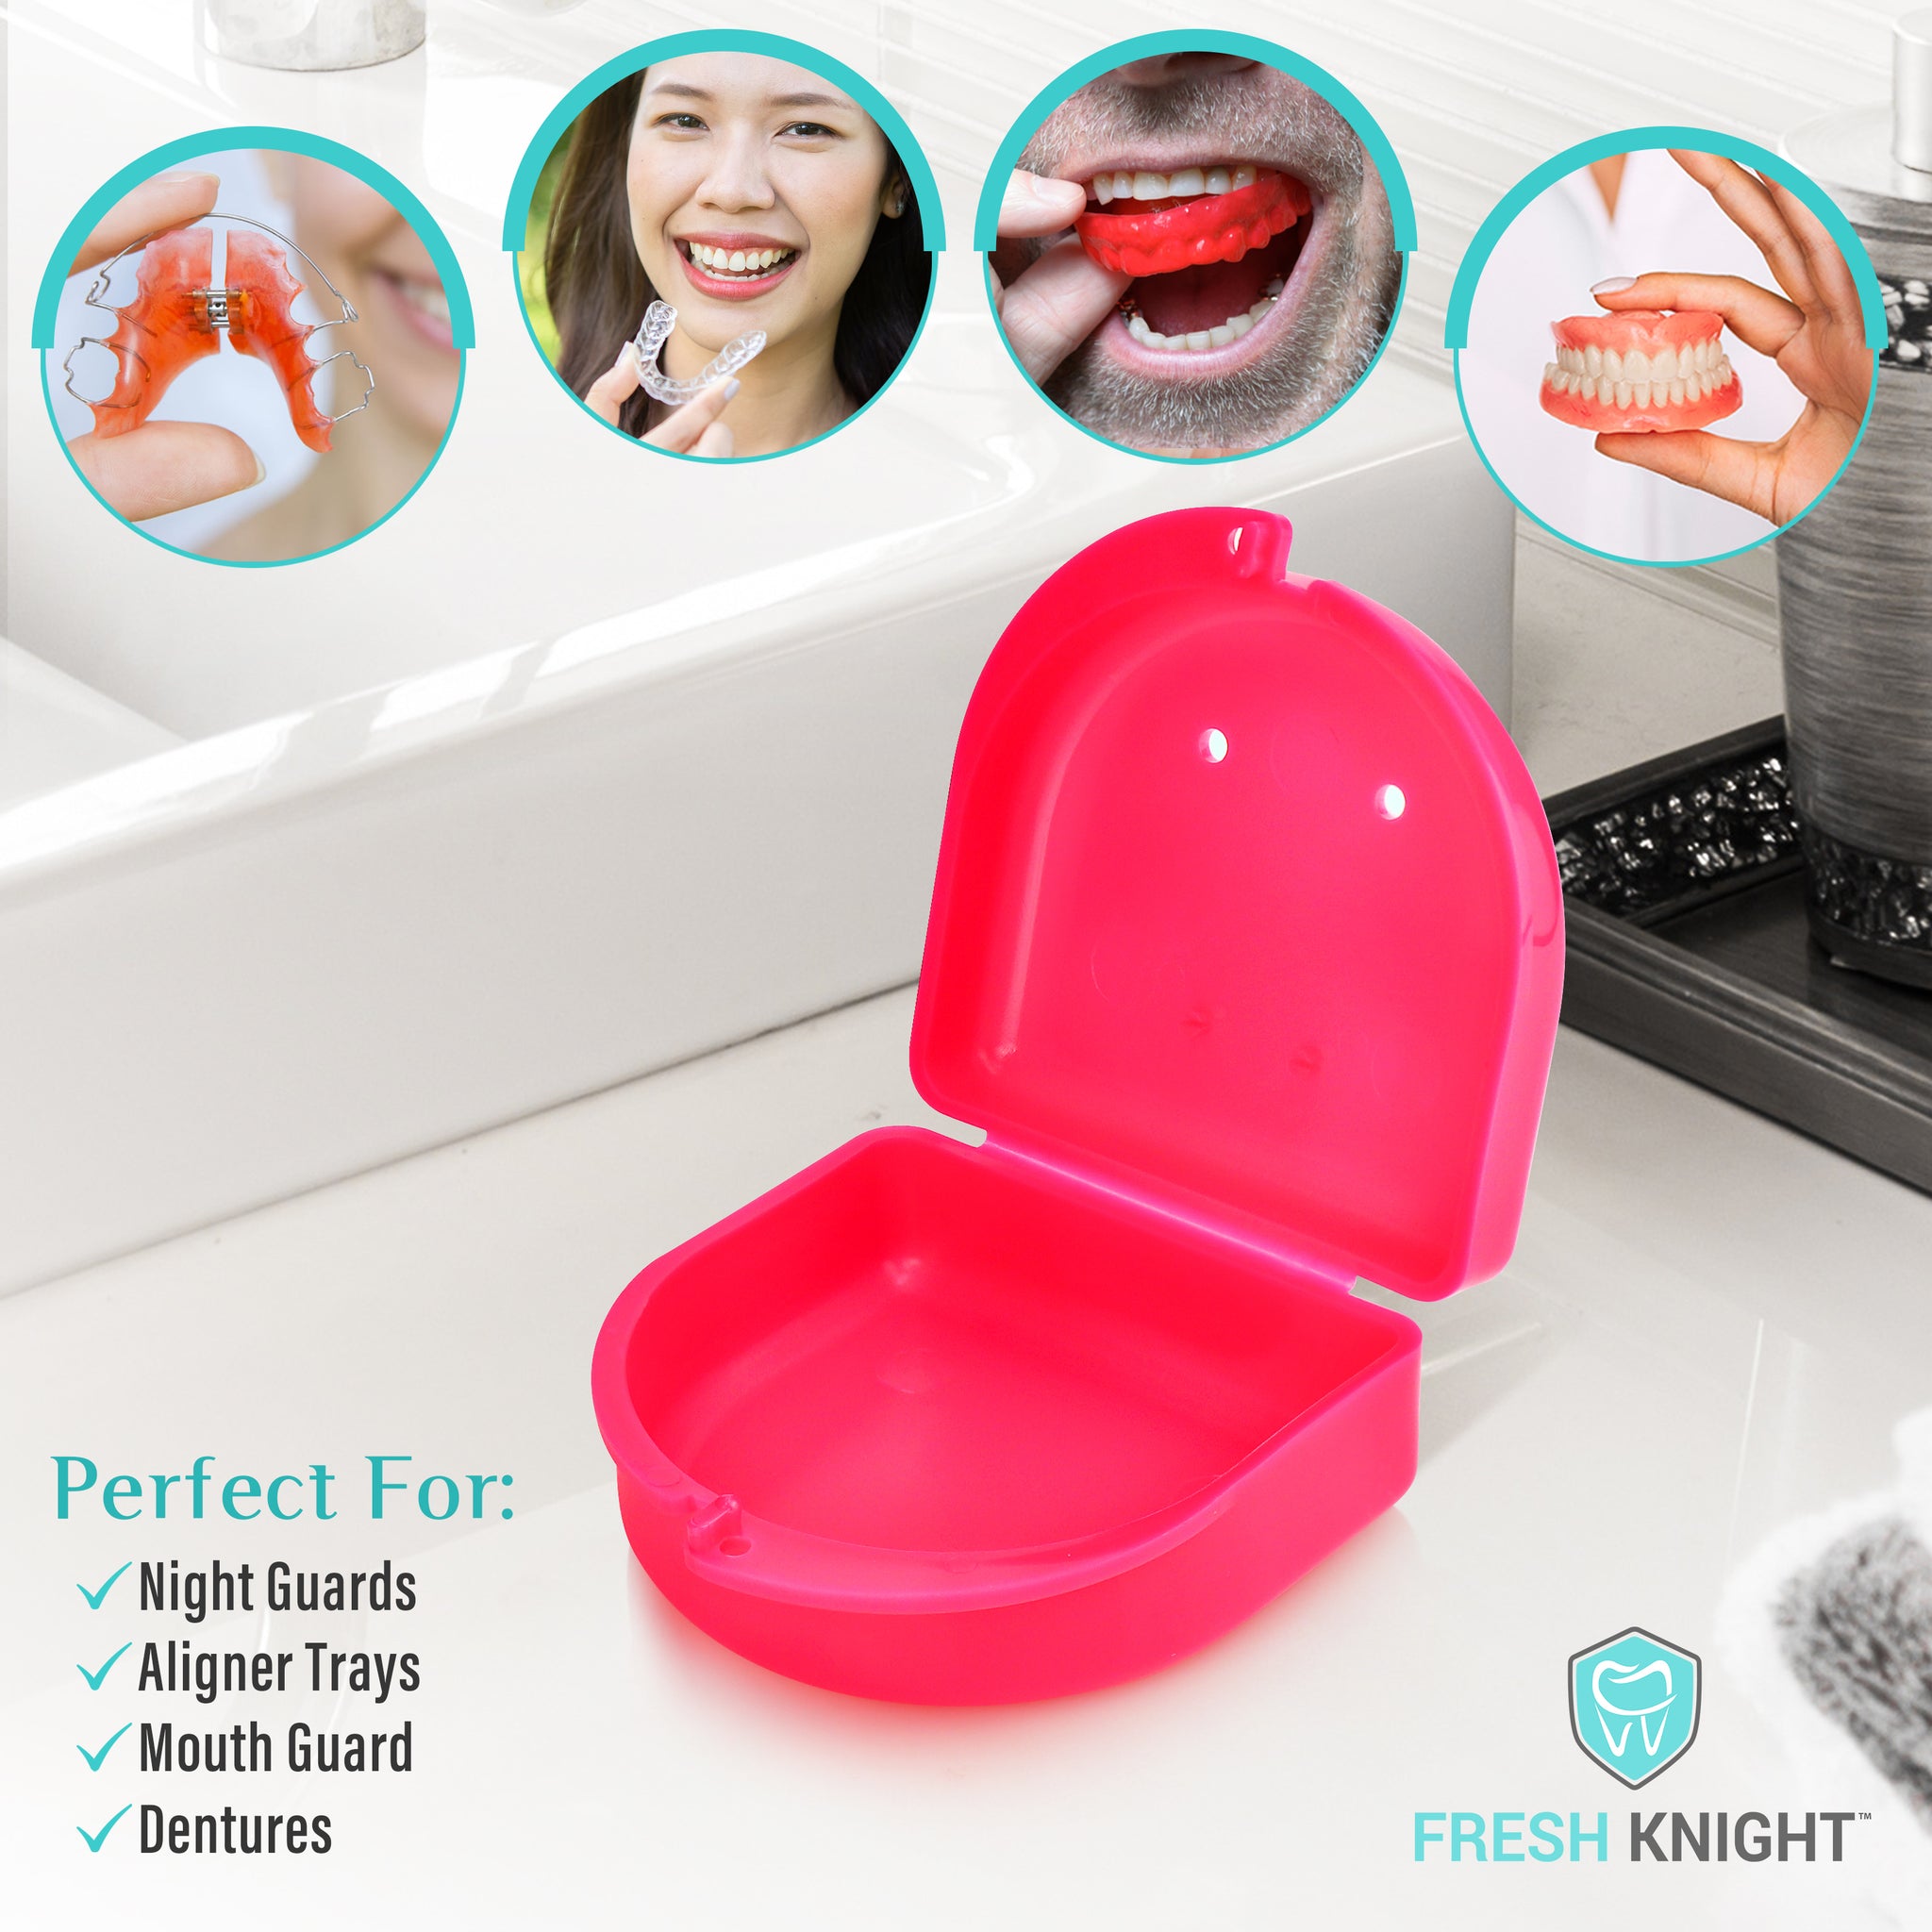 Retainer Case (2 Pack). Retainer Case with Vent Holes. Perfect Denture  case, Mouth Guard Case, Aligner Case, Mouth Guard Case, Retainer Cases (Sky